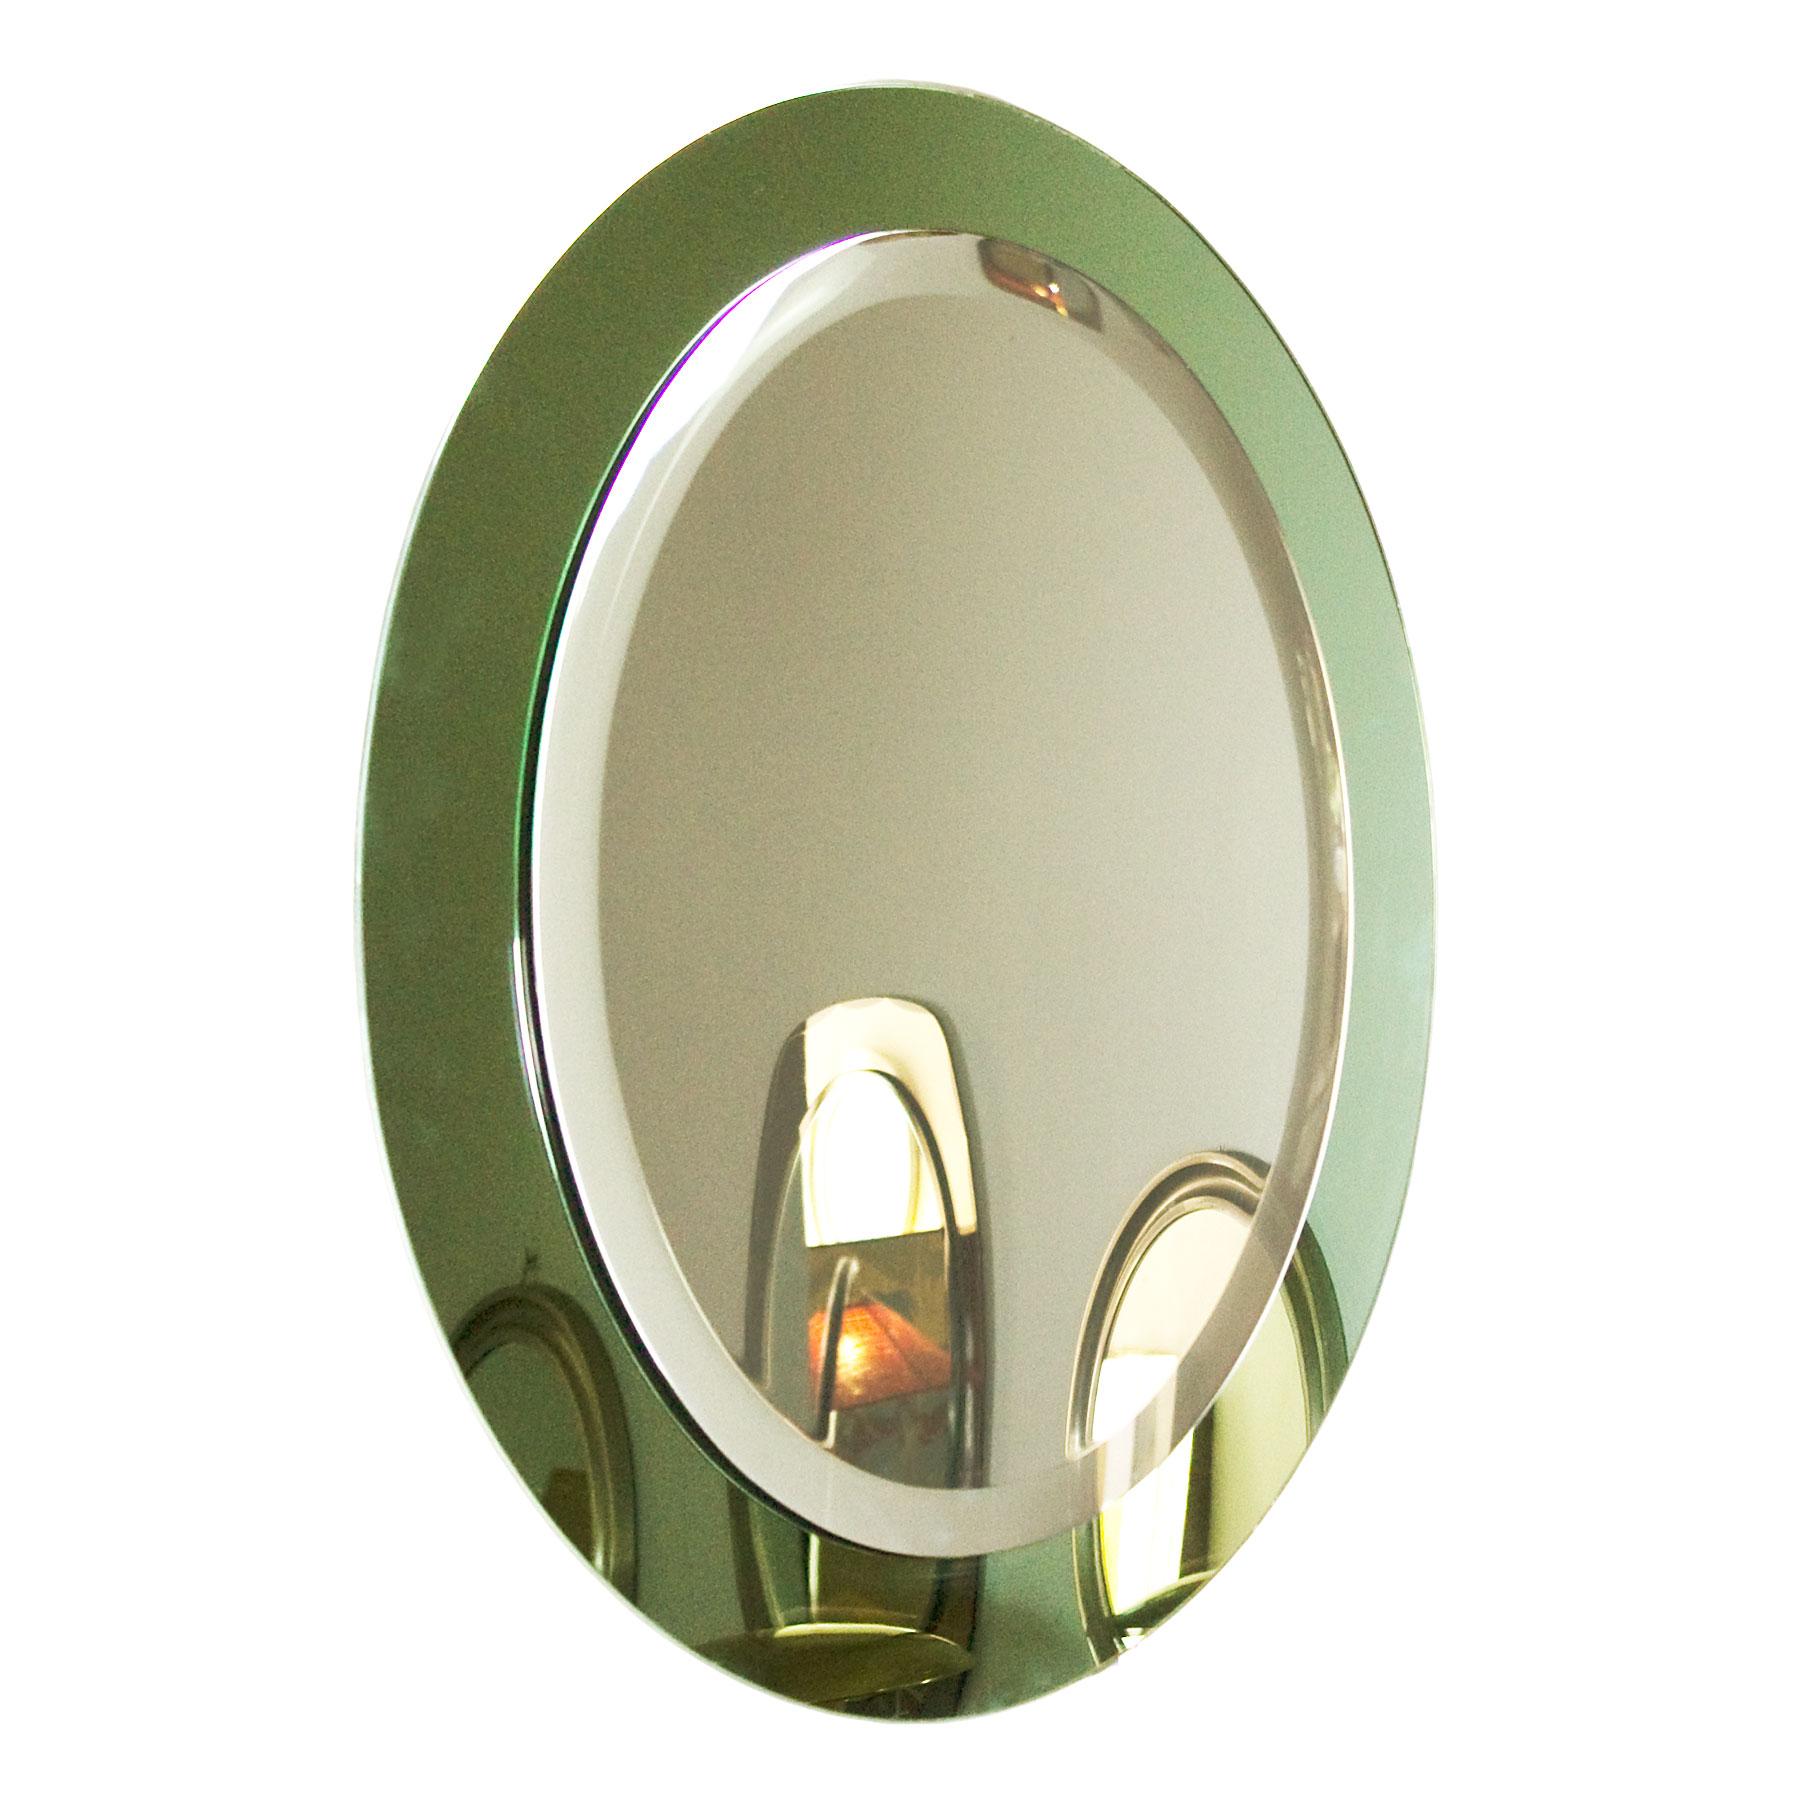 Oval back beveled mirror with light green mirror frame.

Italy, circa 1960.